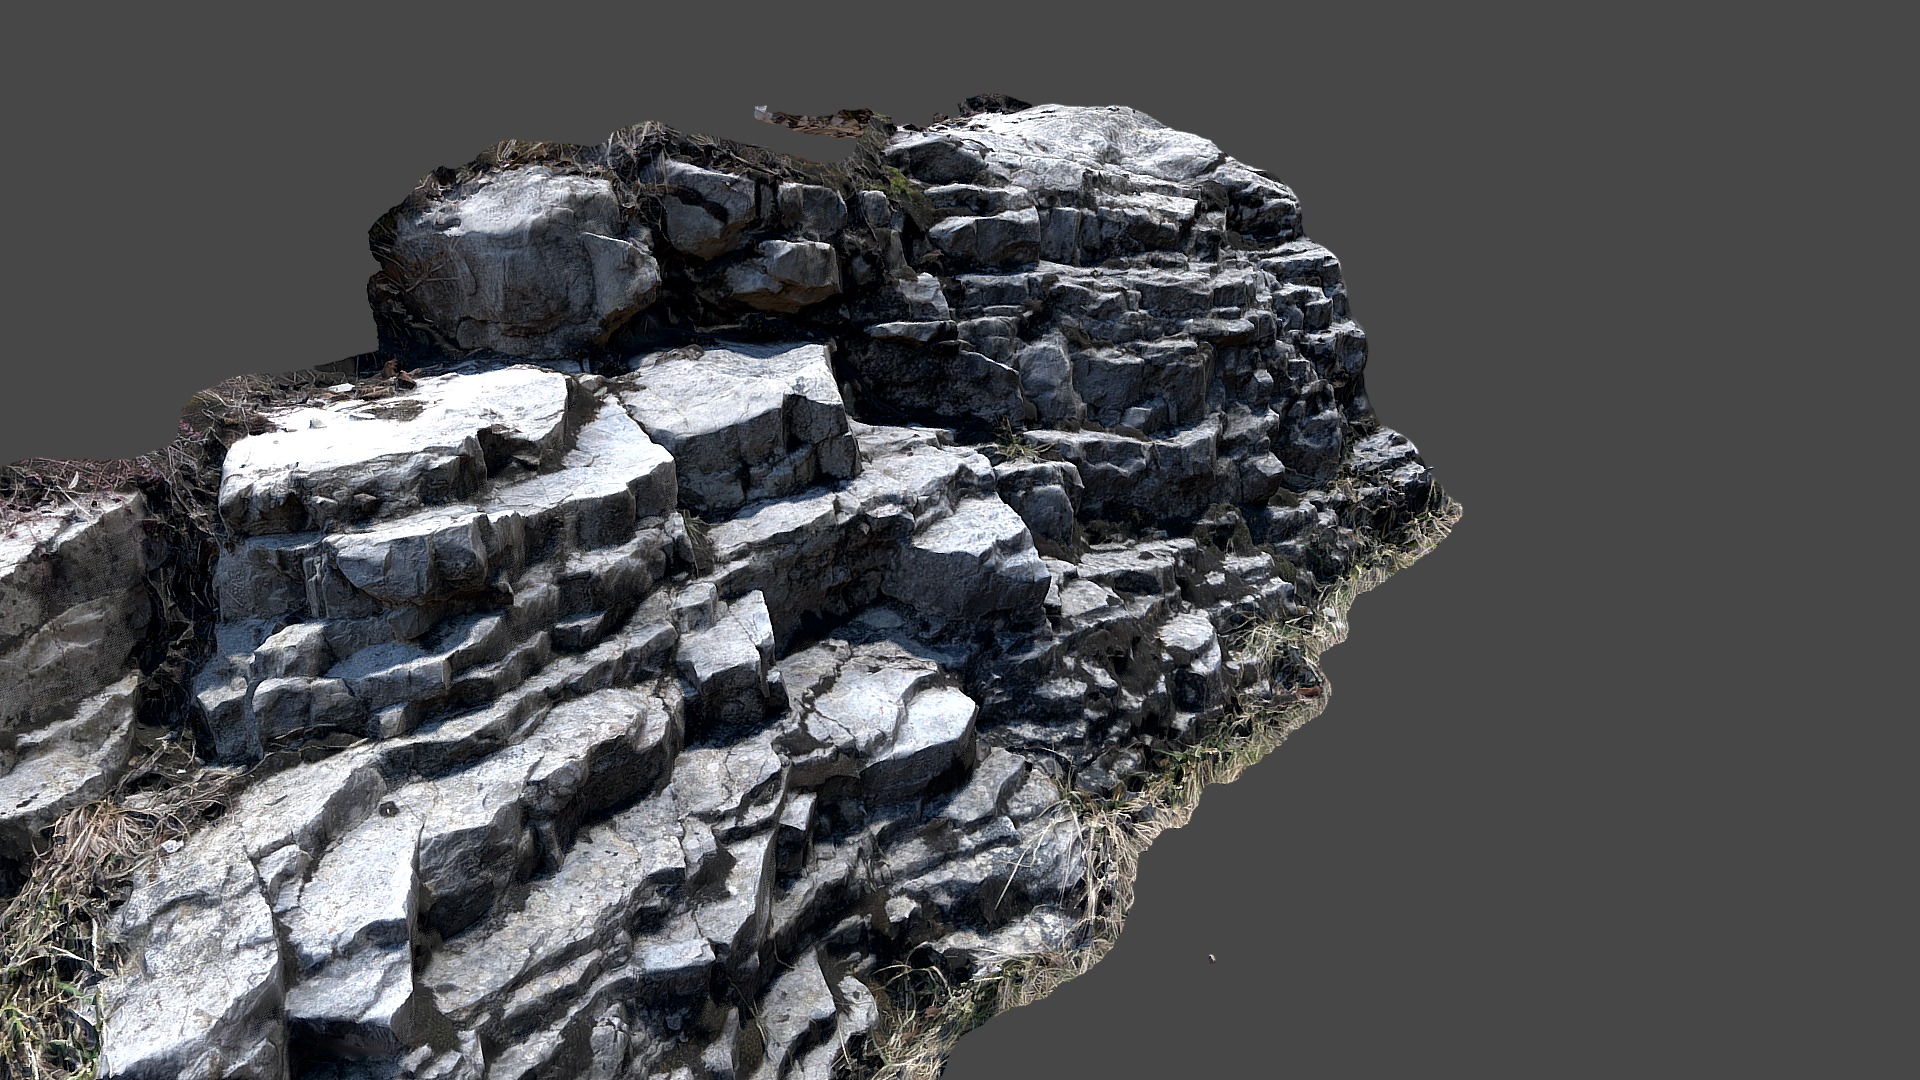 3D model layered rocks hindelang - This is a 3D model of the layered rocks hindelang. The 3D model is about a rocky area with a stone wall.